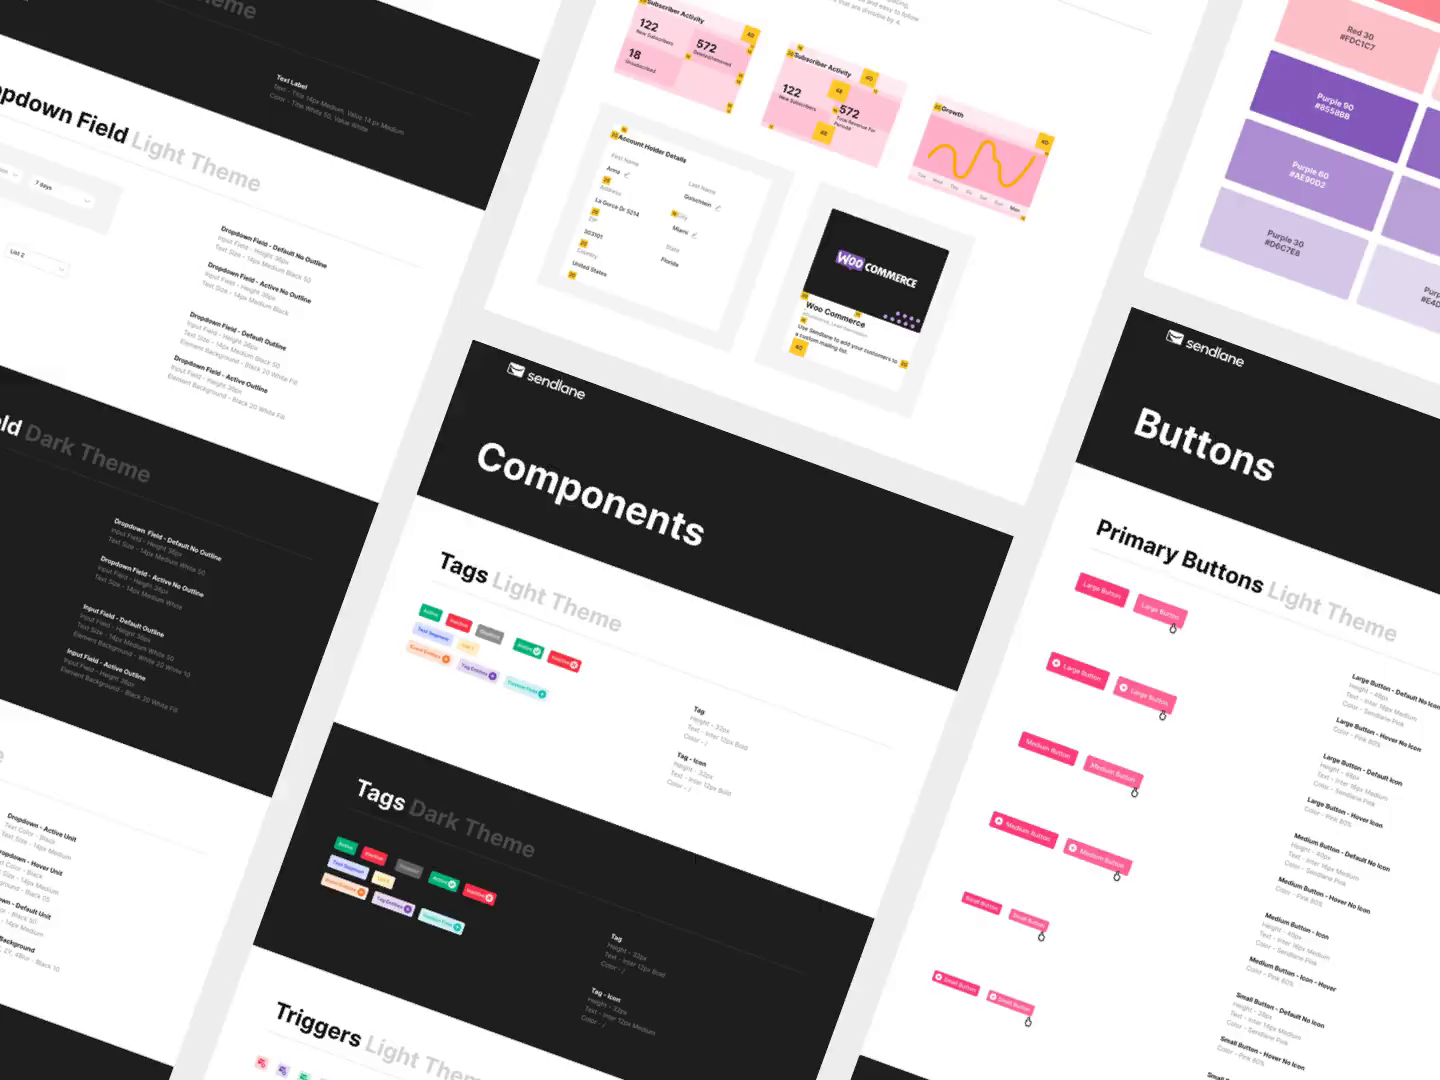 Sendlane Product - Design System balkan brothers buttons styles color system component library component system dark theme dashboards design system icons input styles light theme marketing platform product design smart design typography system visual design